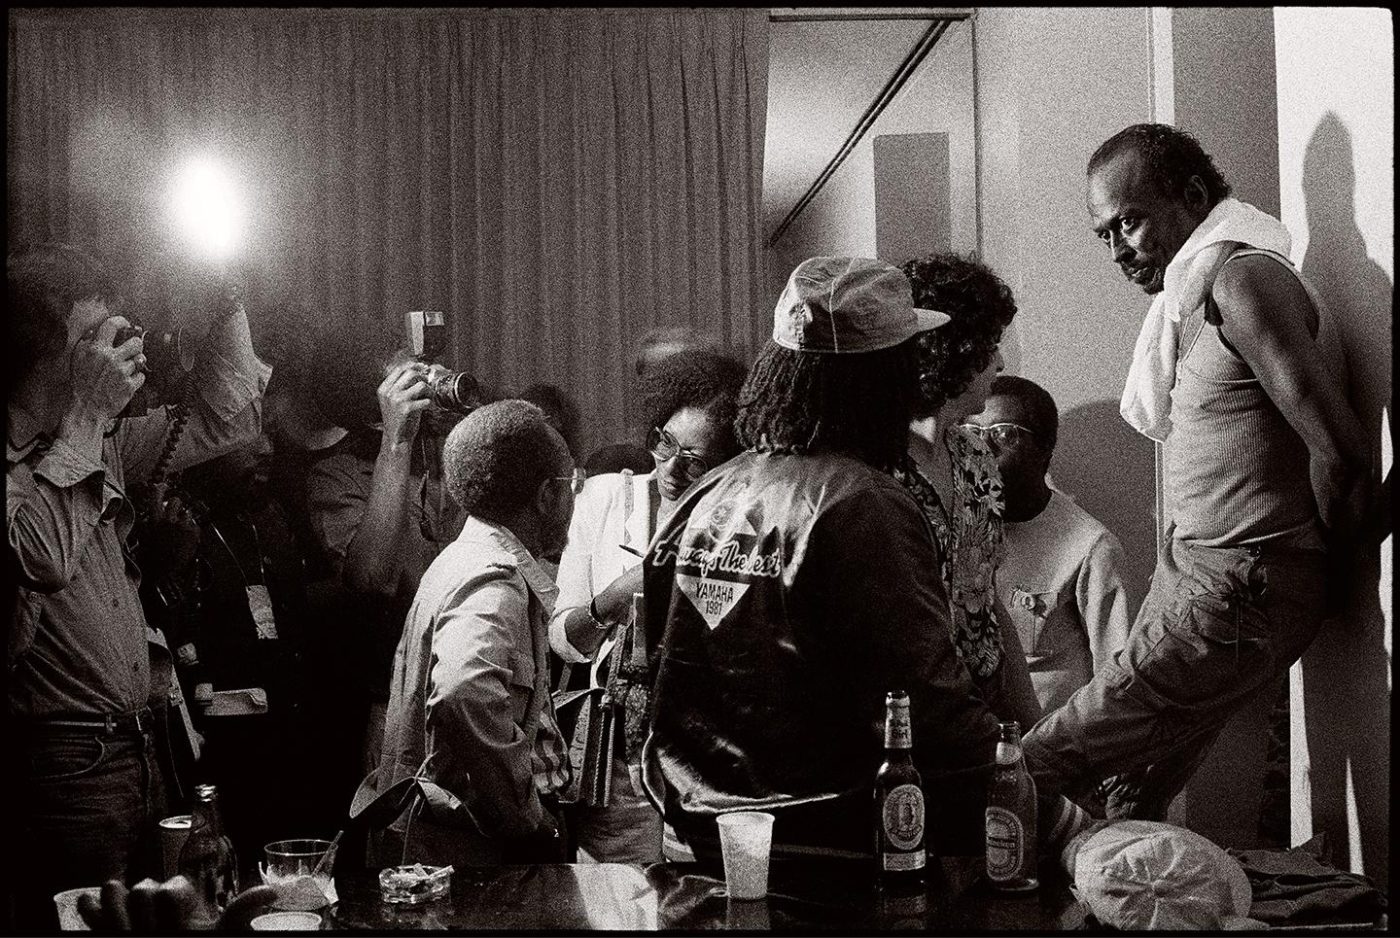 Jazz Photograph of Miles Davis by Frank Stewart, 1981, titled Miles in the Green Room